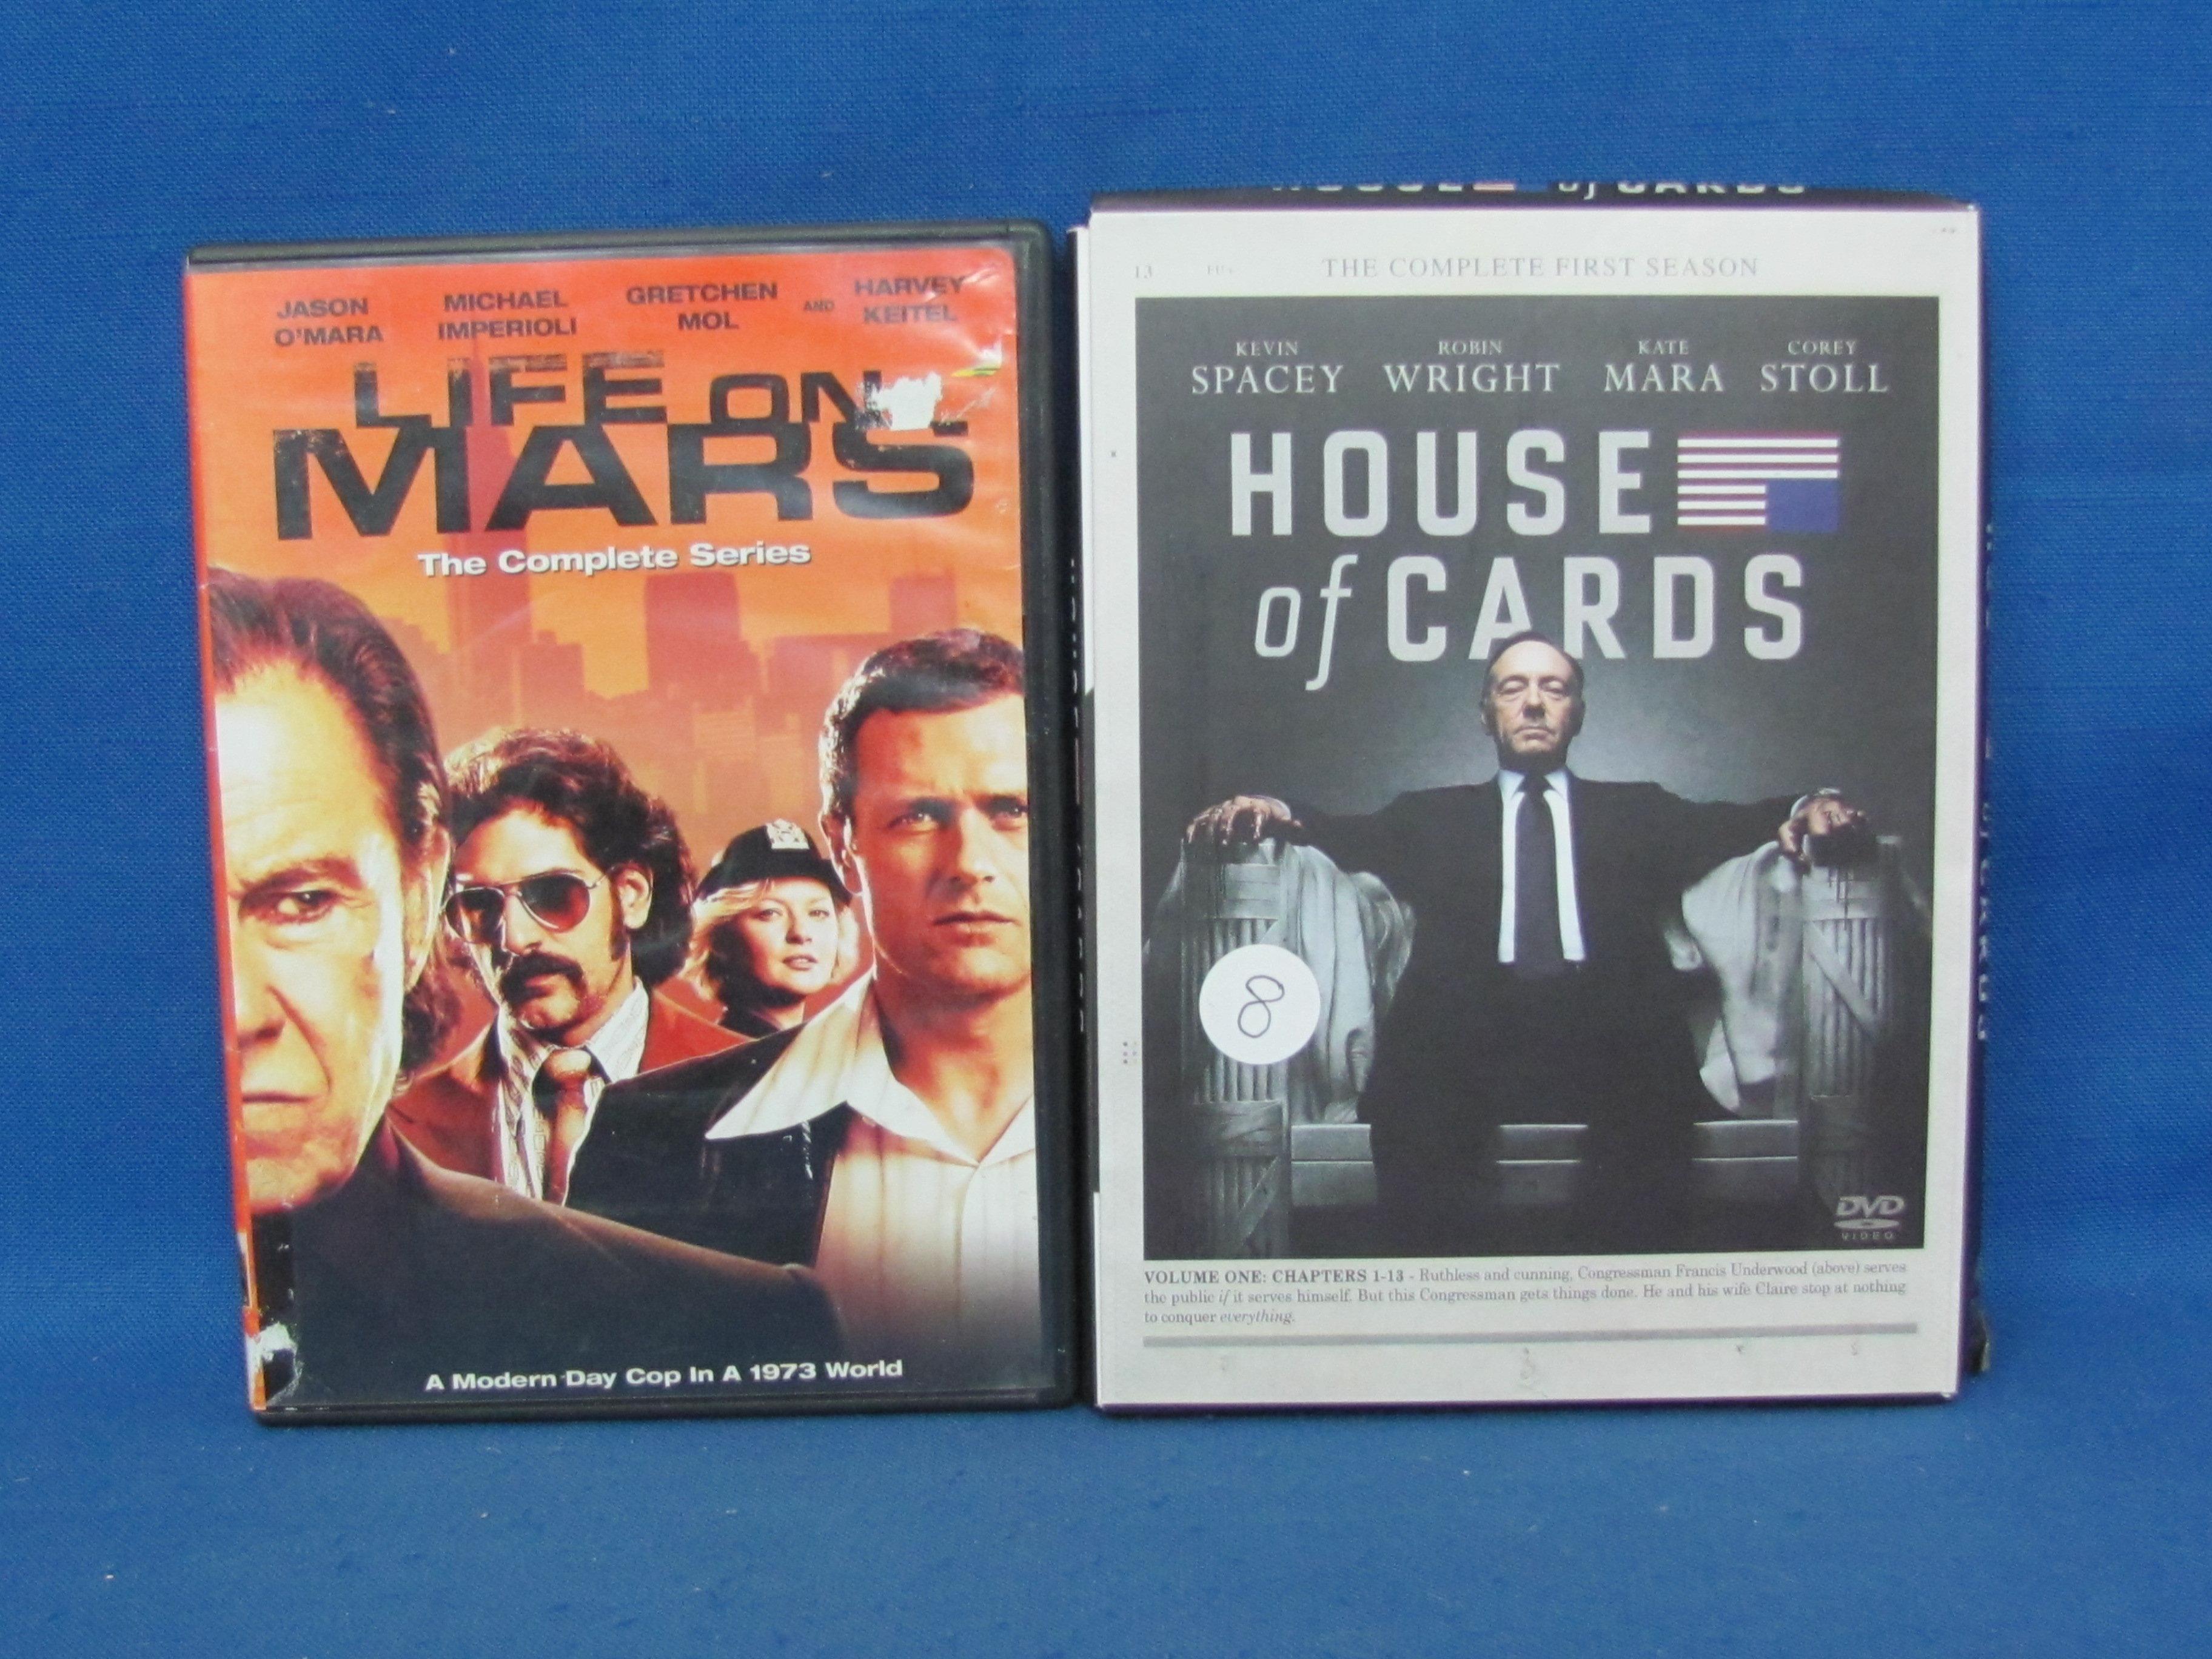 “House of Cards” Season 1 - “Life on Mars” Complete Series – DVDs -